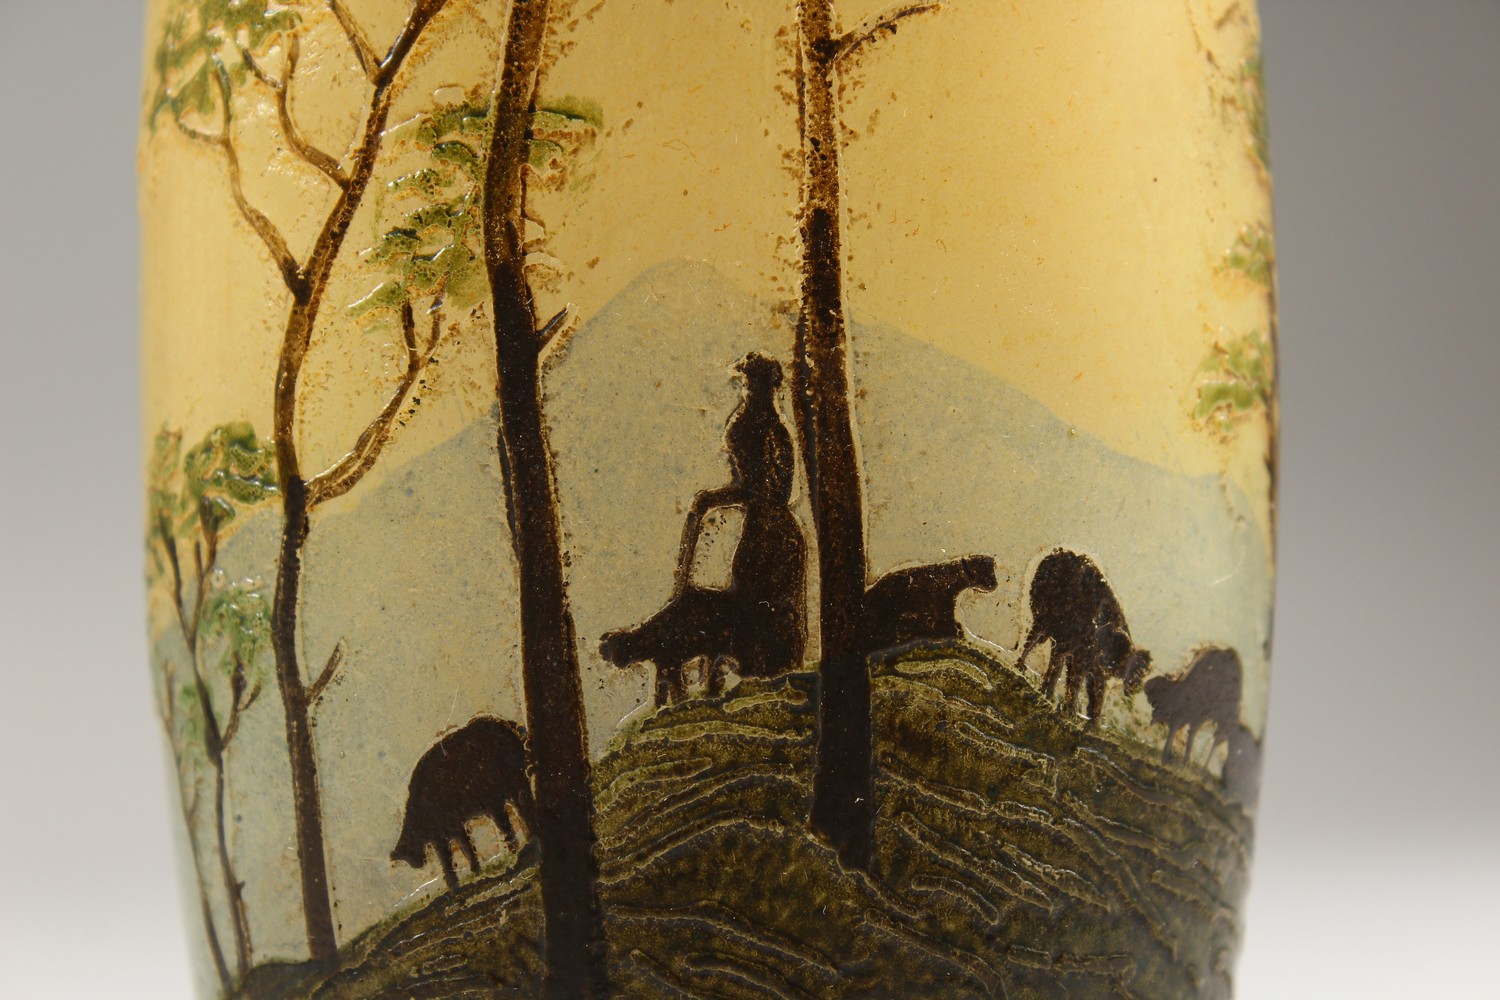 LEGRAS A GOOD CAMEO GLASS VASE, shepherdess with sheep on a hilltop with trees. Signed. 6ins high. - Image 8 of 11